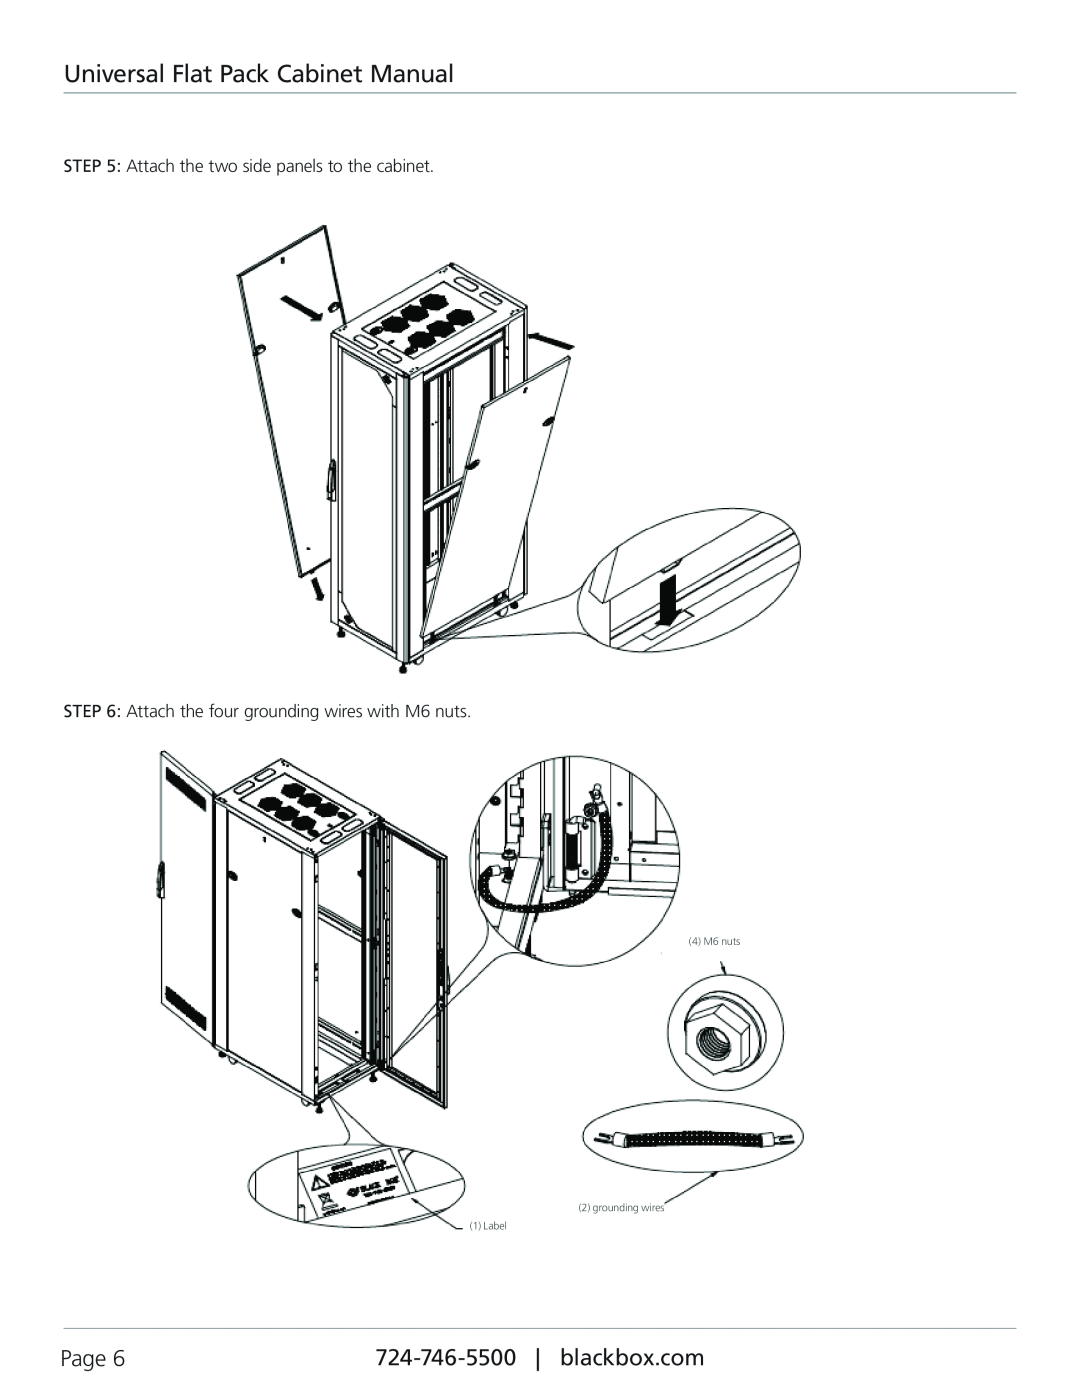 Black Box RMT3200A-R2 manual Universal Flat Pack Cabinet Manual, Page, Attach the two side panels to the cabinet 